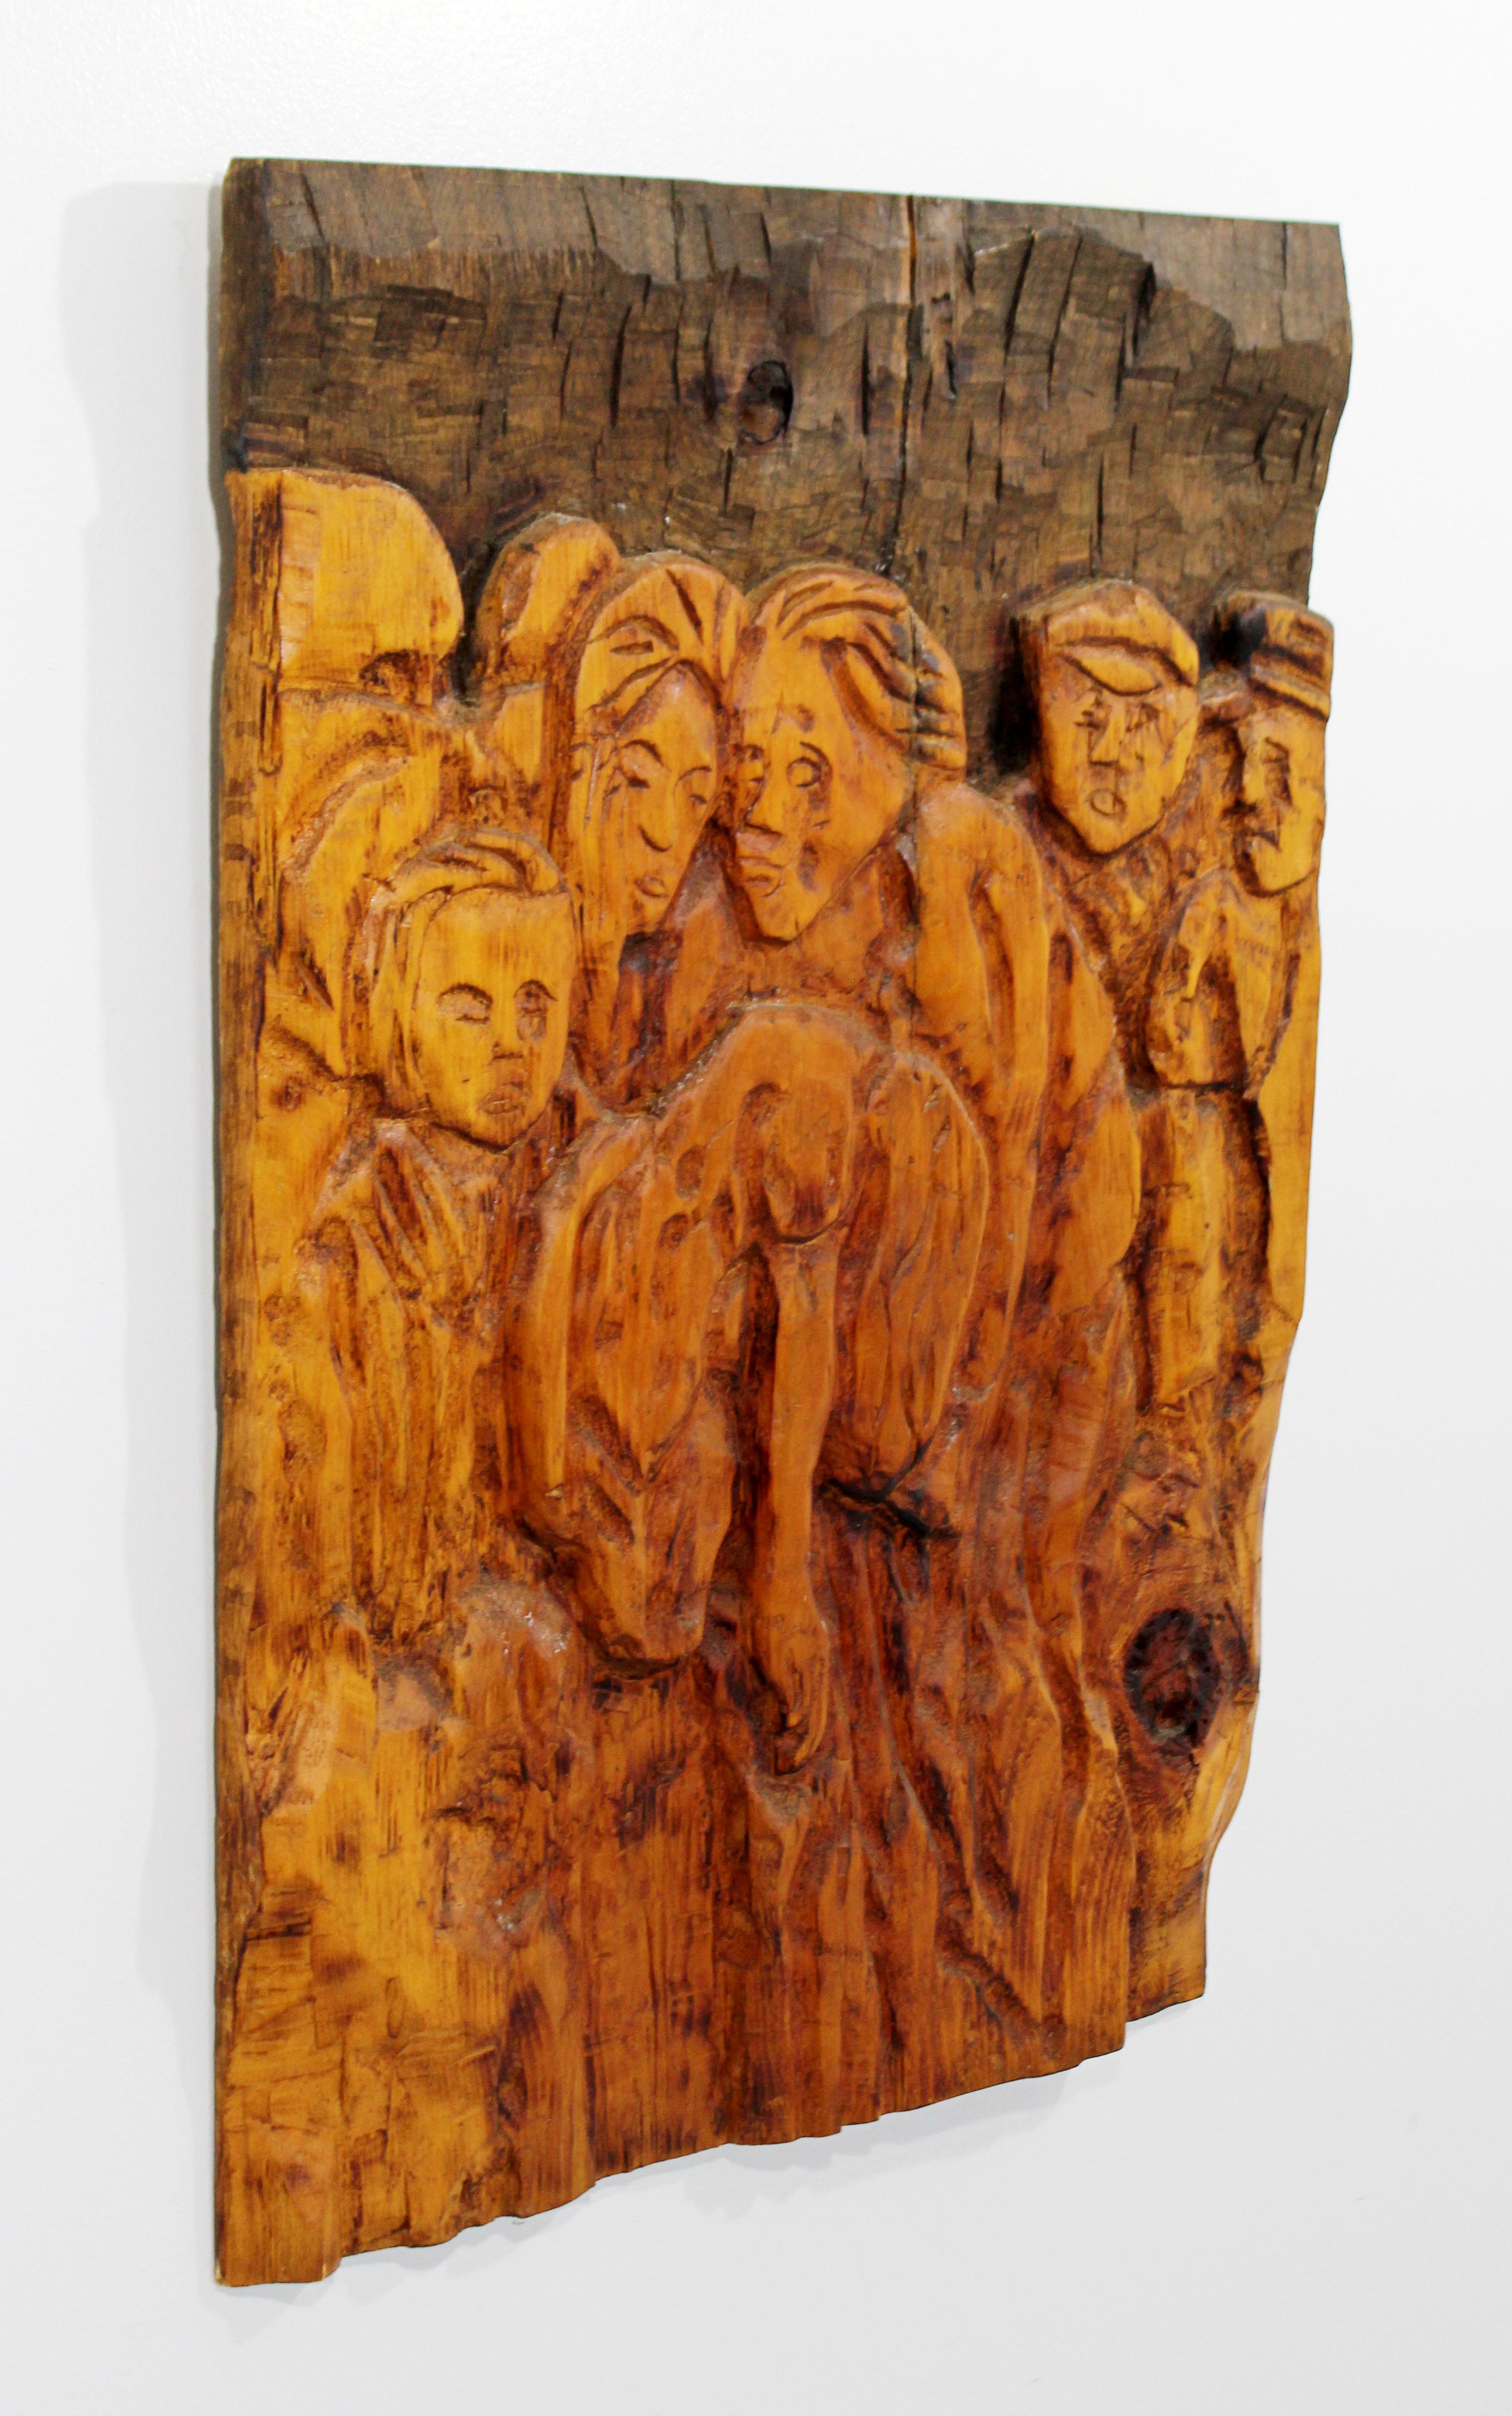 For your consideration is an incredible, carved wood, hanging wall relief sculpture, by Jean-Claude Gaugy, circa the 1970s. In excellent condition. The dimensions are 24